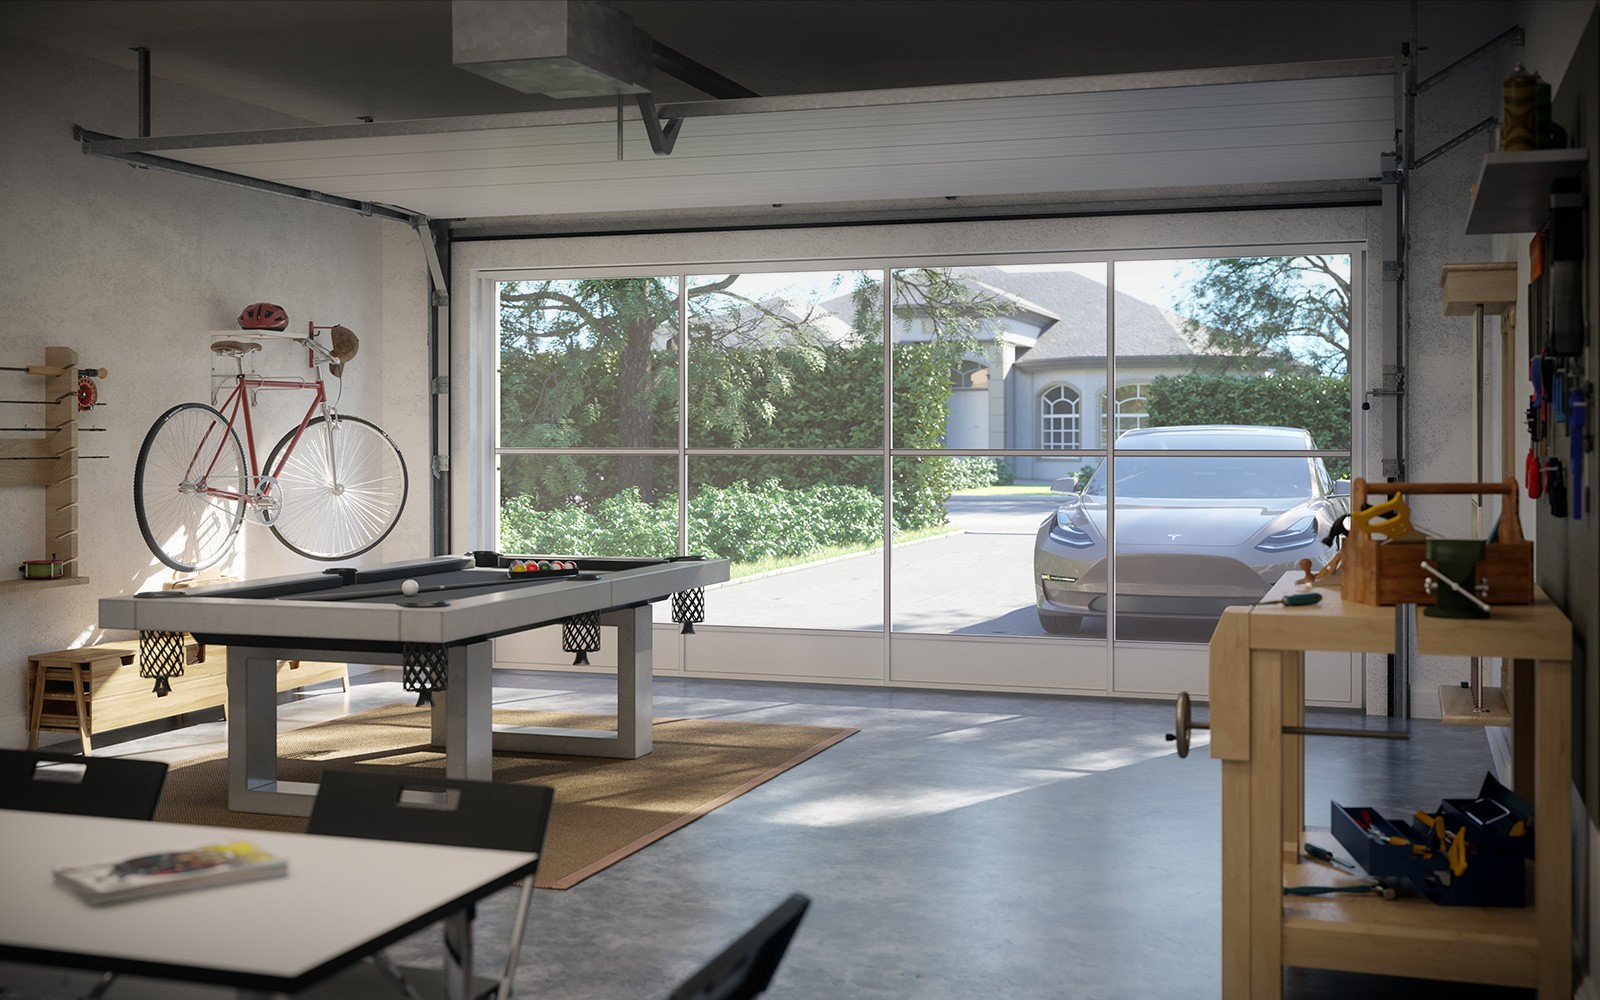 Garages can be transformed into livable spaces with an Eze-Breeze enclosure system.